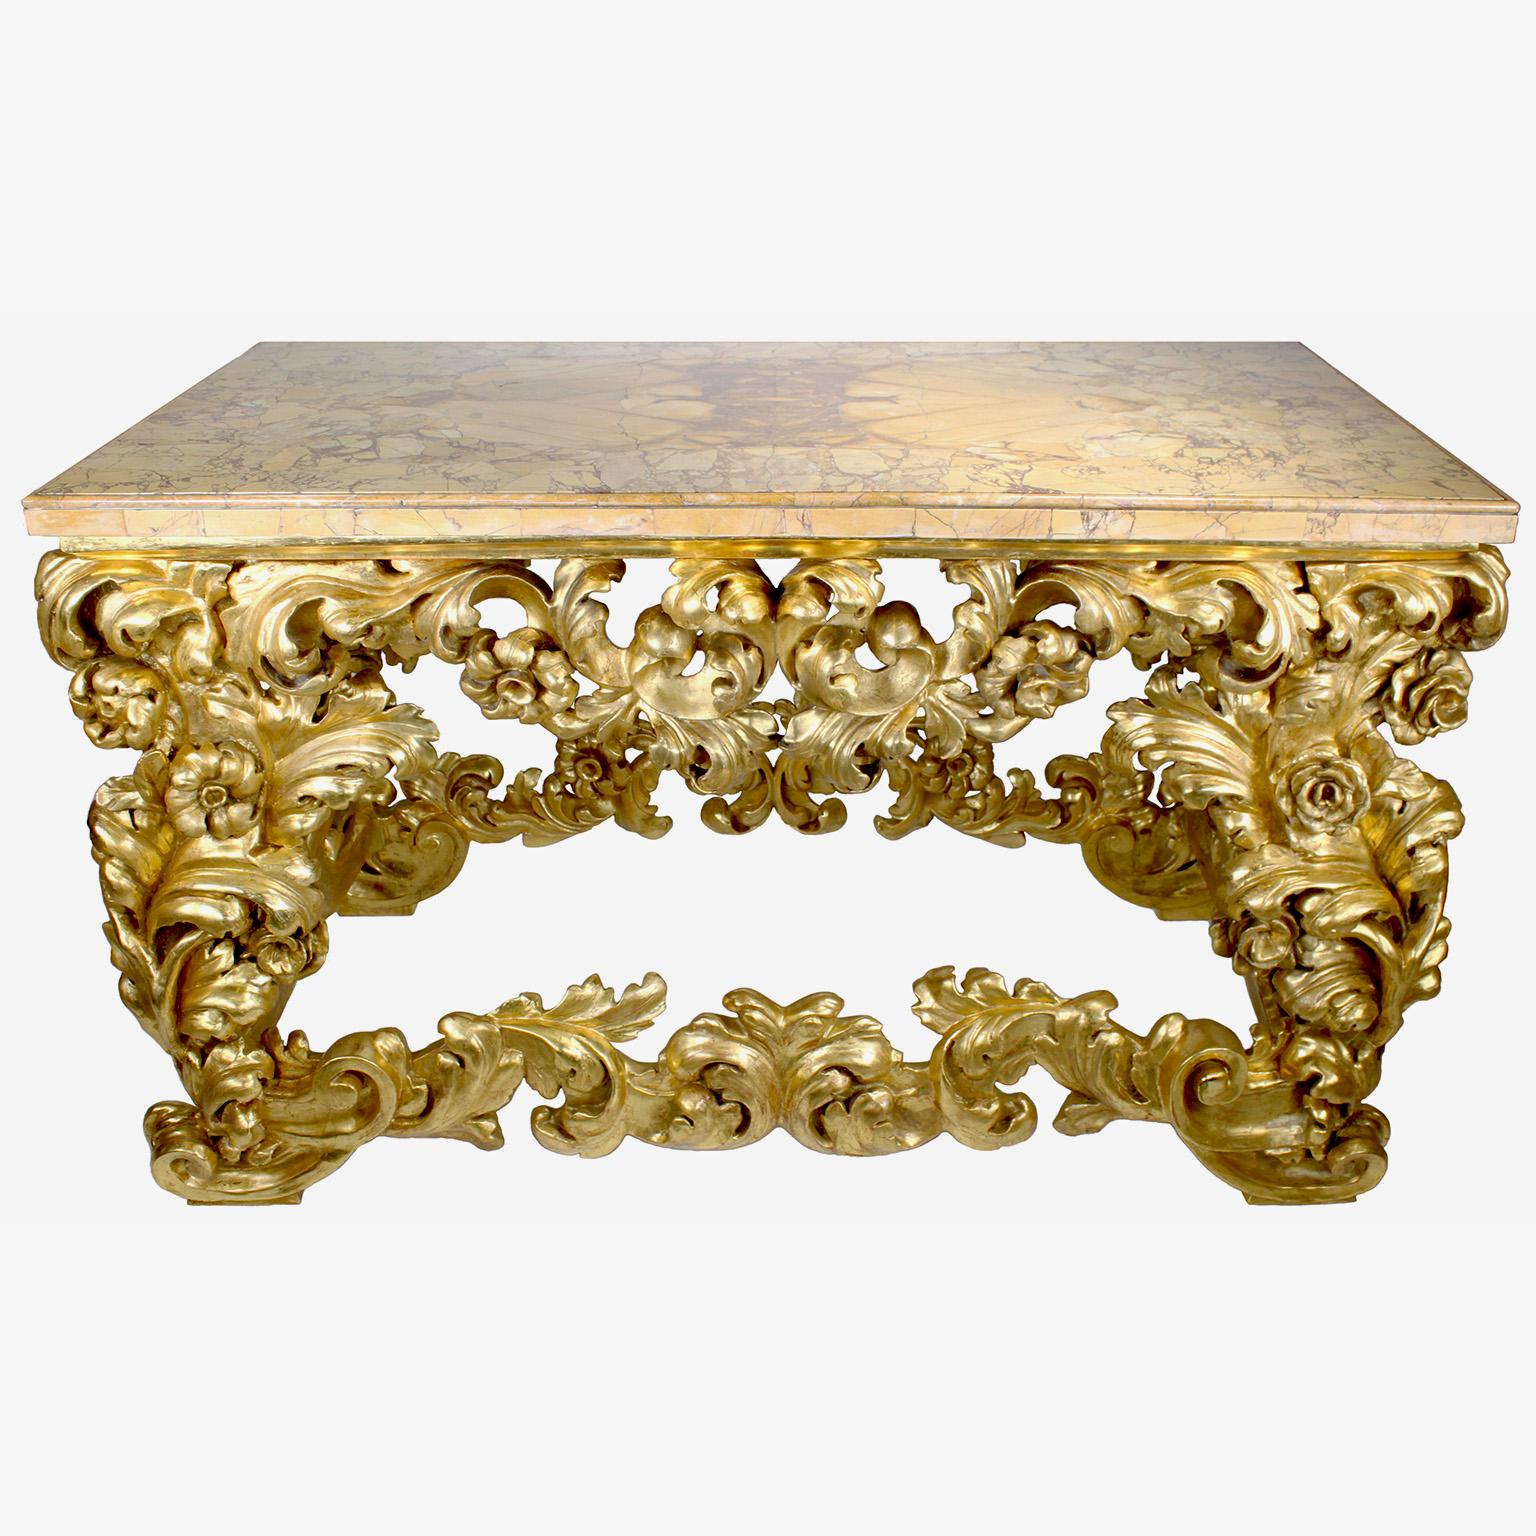 A large and very fine Italian 19th century Florentine Baroque style giltwood carved wall console table with marble top. The ornately carved rectangular shaped scrolled body frame in a leaf and floral design with scrolling foliate and acanthus,